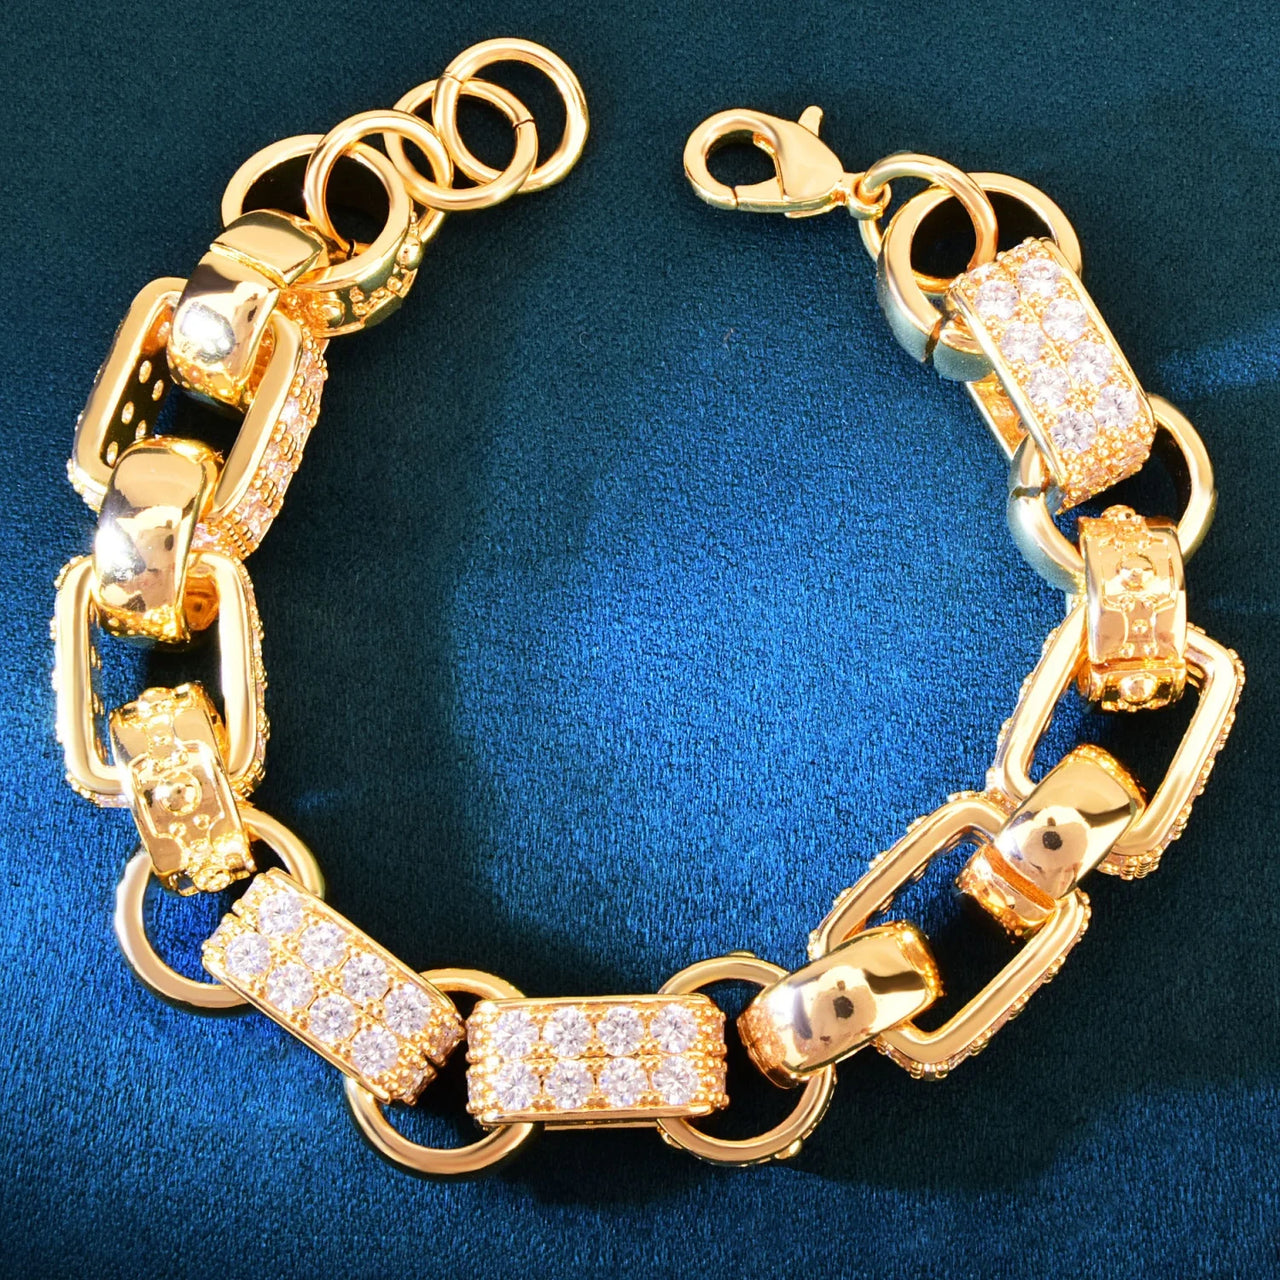 14mm Ring Link Box Bracelet - Different Drips